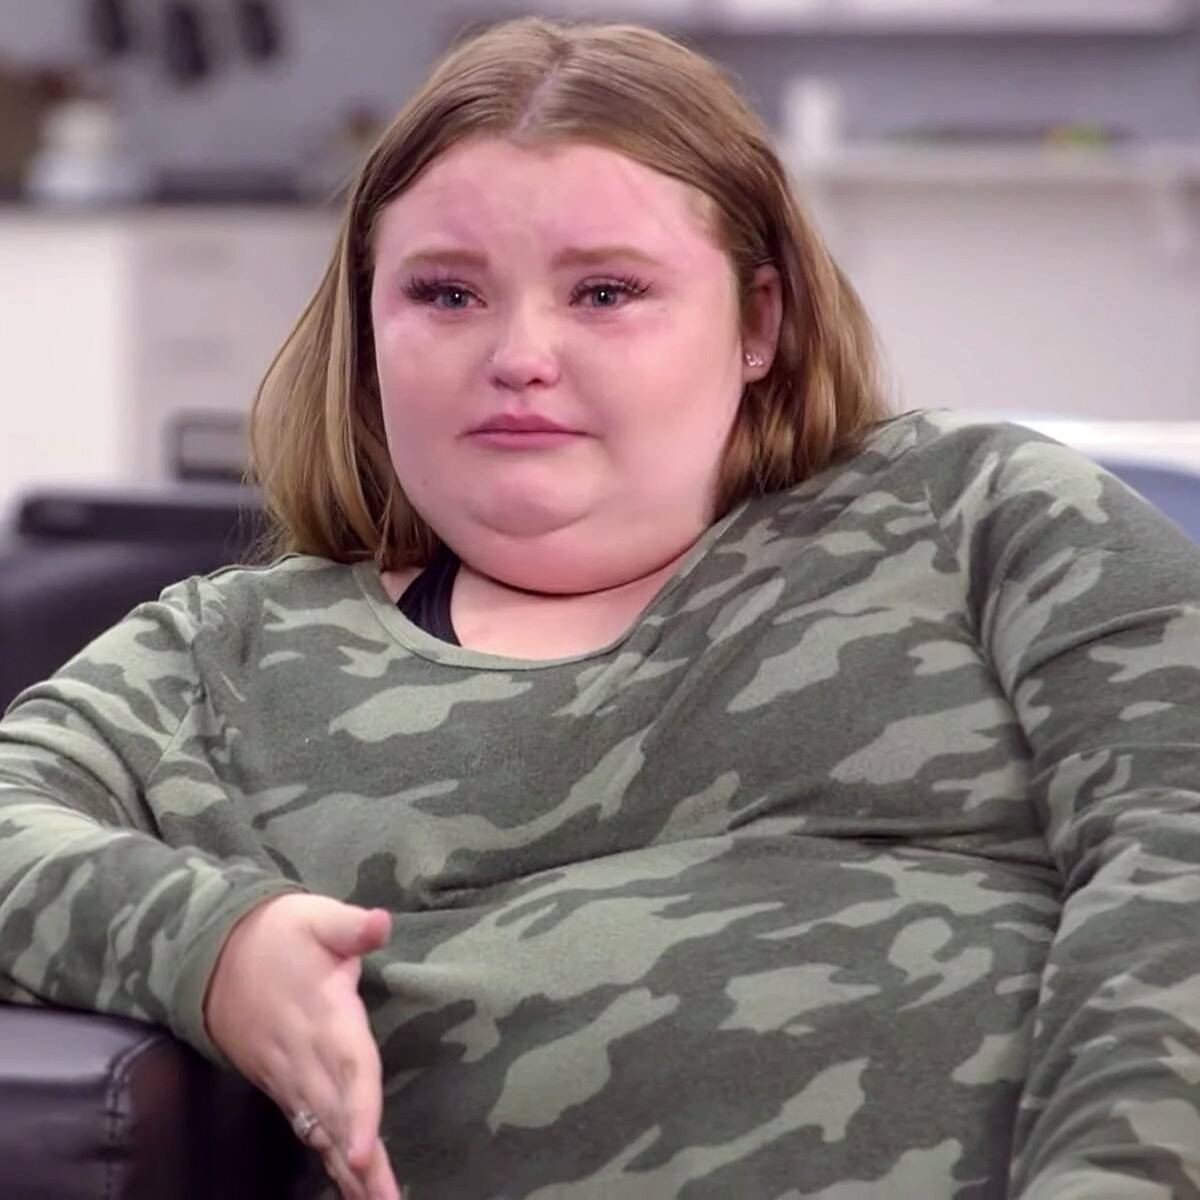 Honey Boo Boo Fans Worried about Her 20 Year Old Boyfriend!